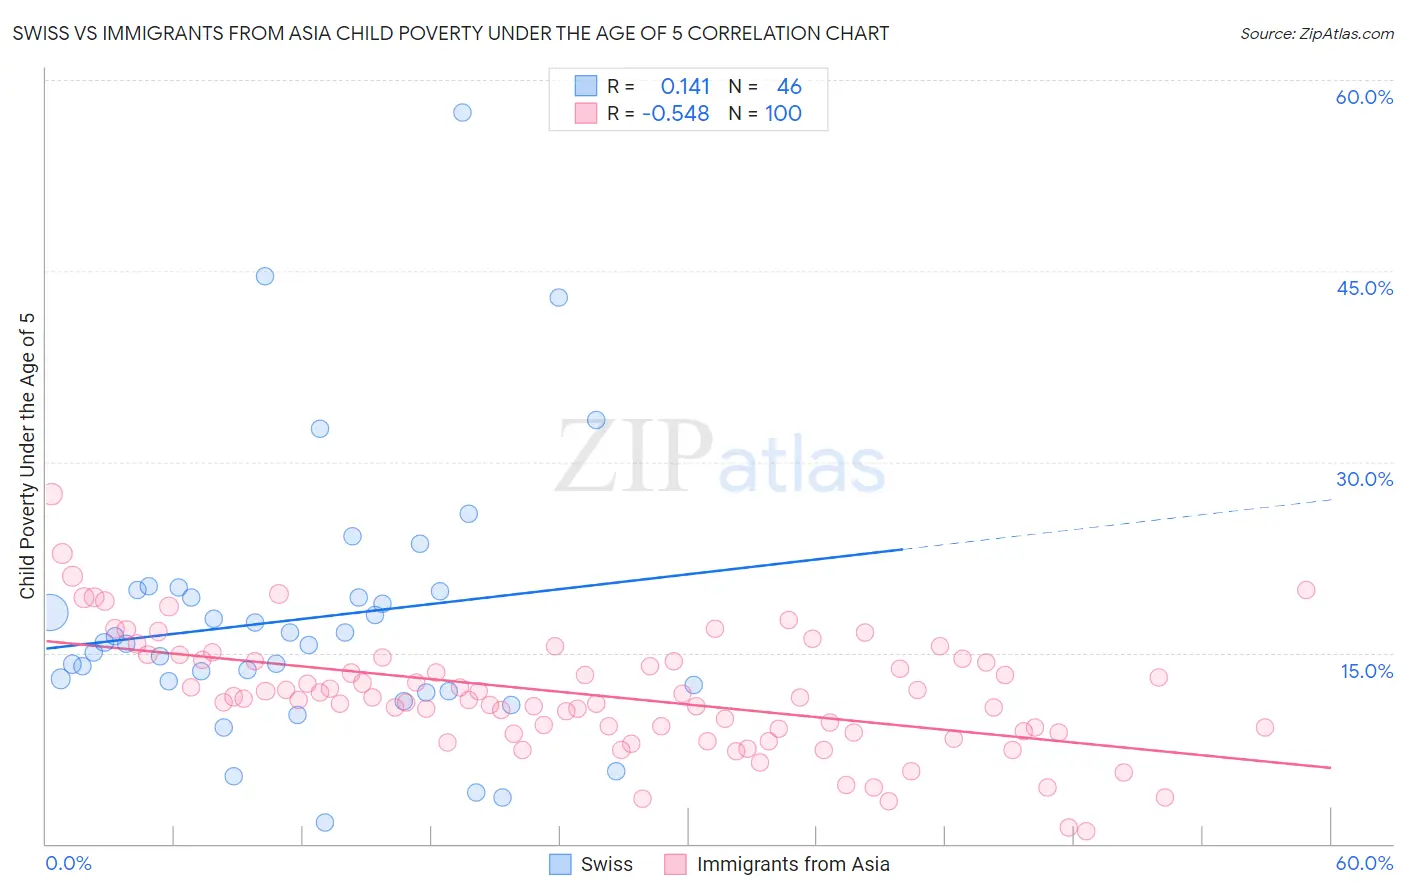 Swiss vs Immigrants from Asia Child Poverty Under the Age of 5